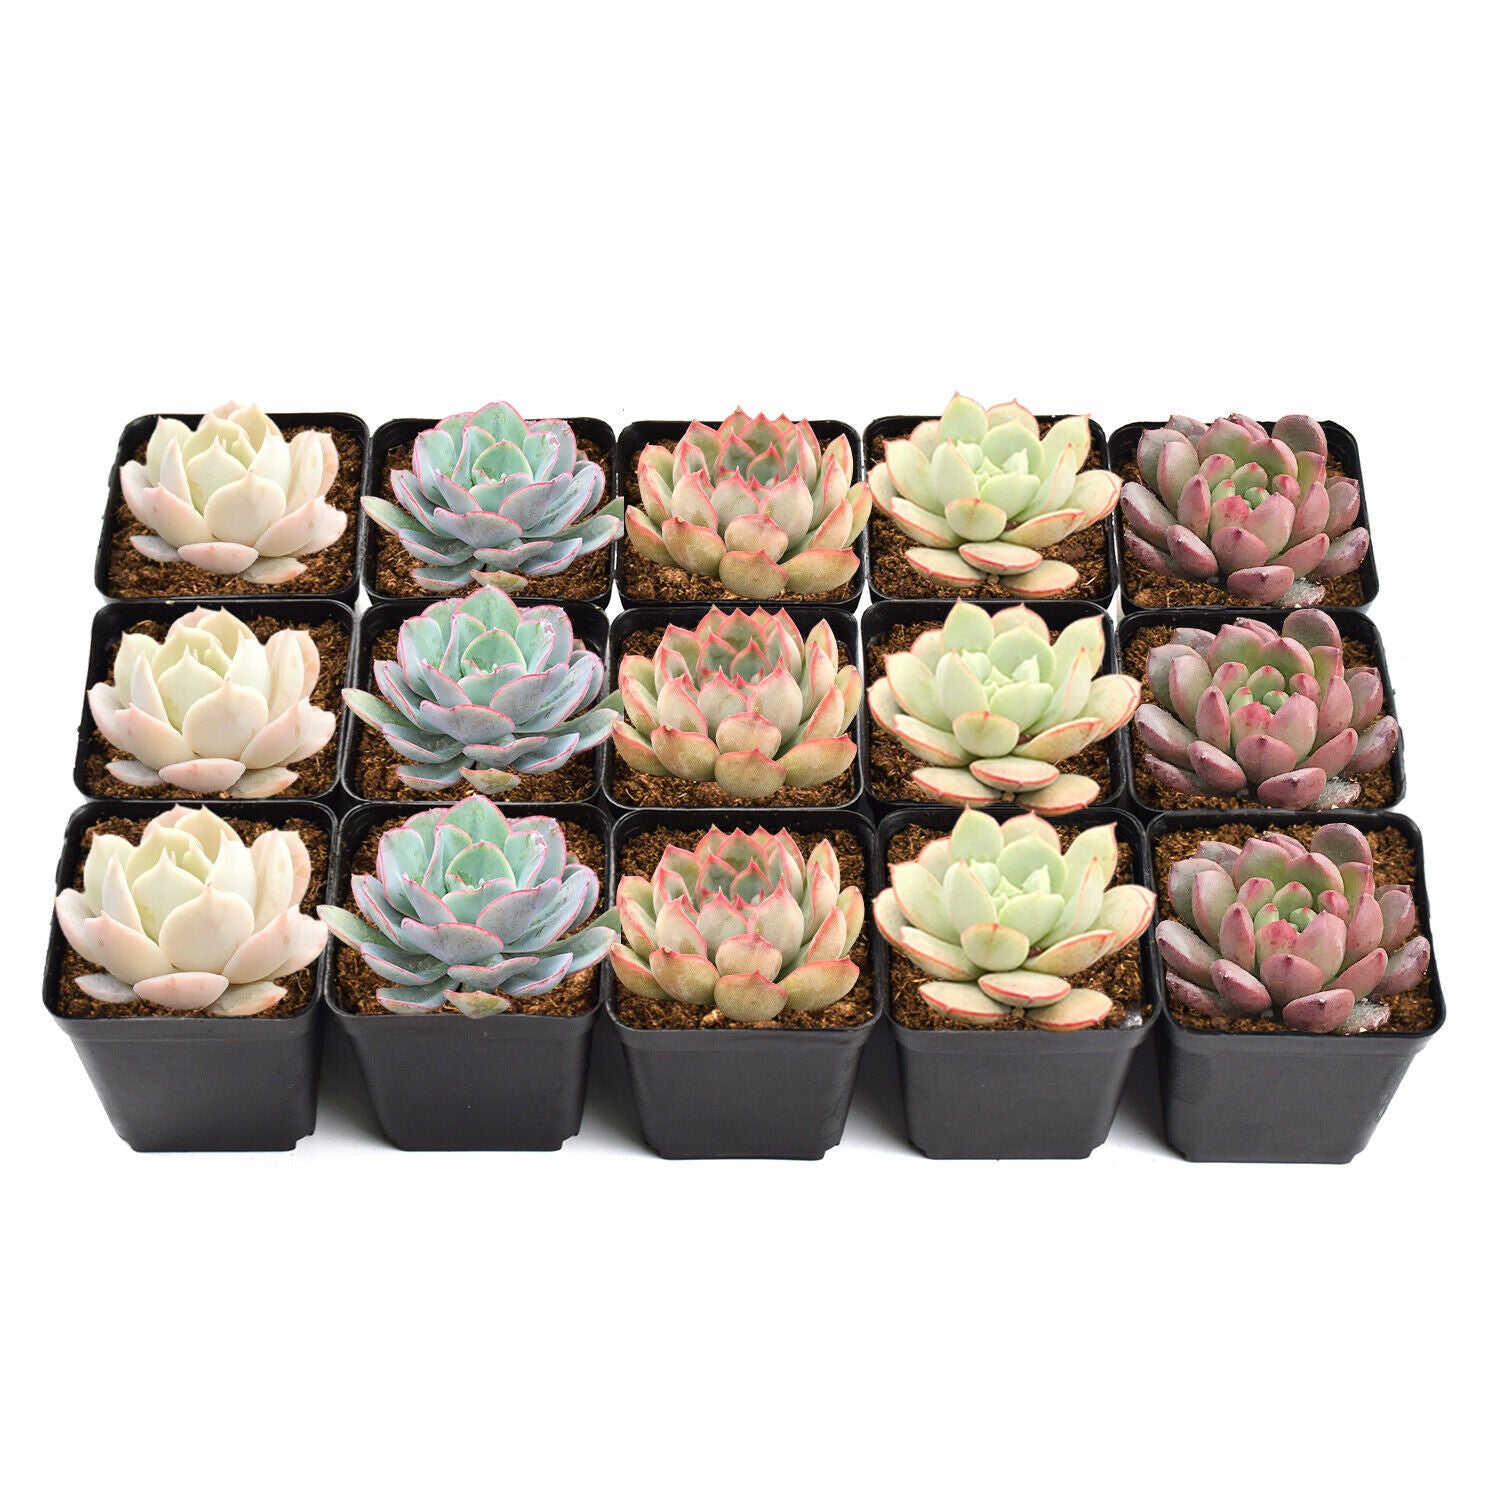 15 Pack Succulents Plant Rooted in 2inch Planters Rare Live Assorted Plants For Wedding Christmas Garden